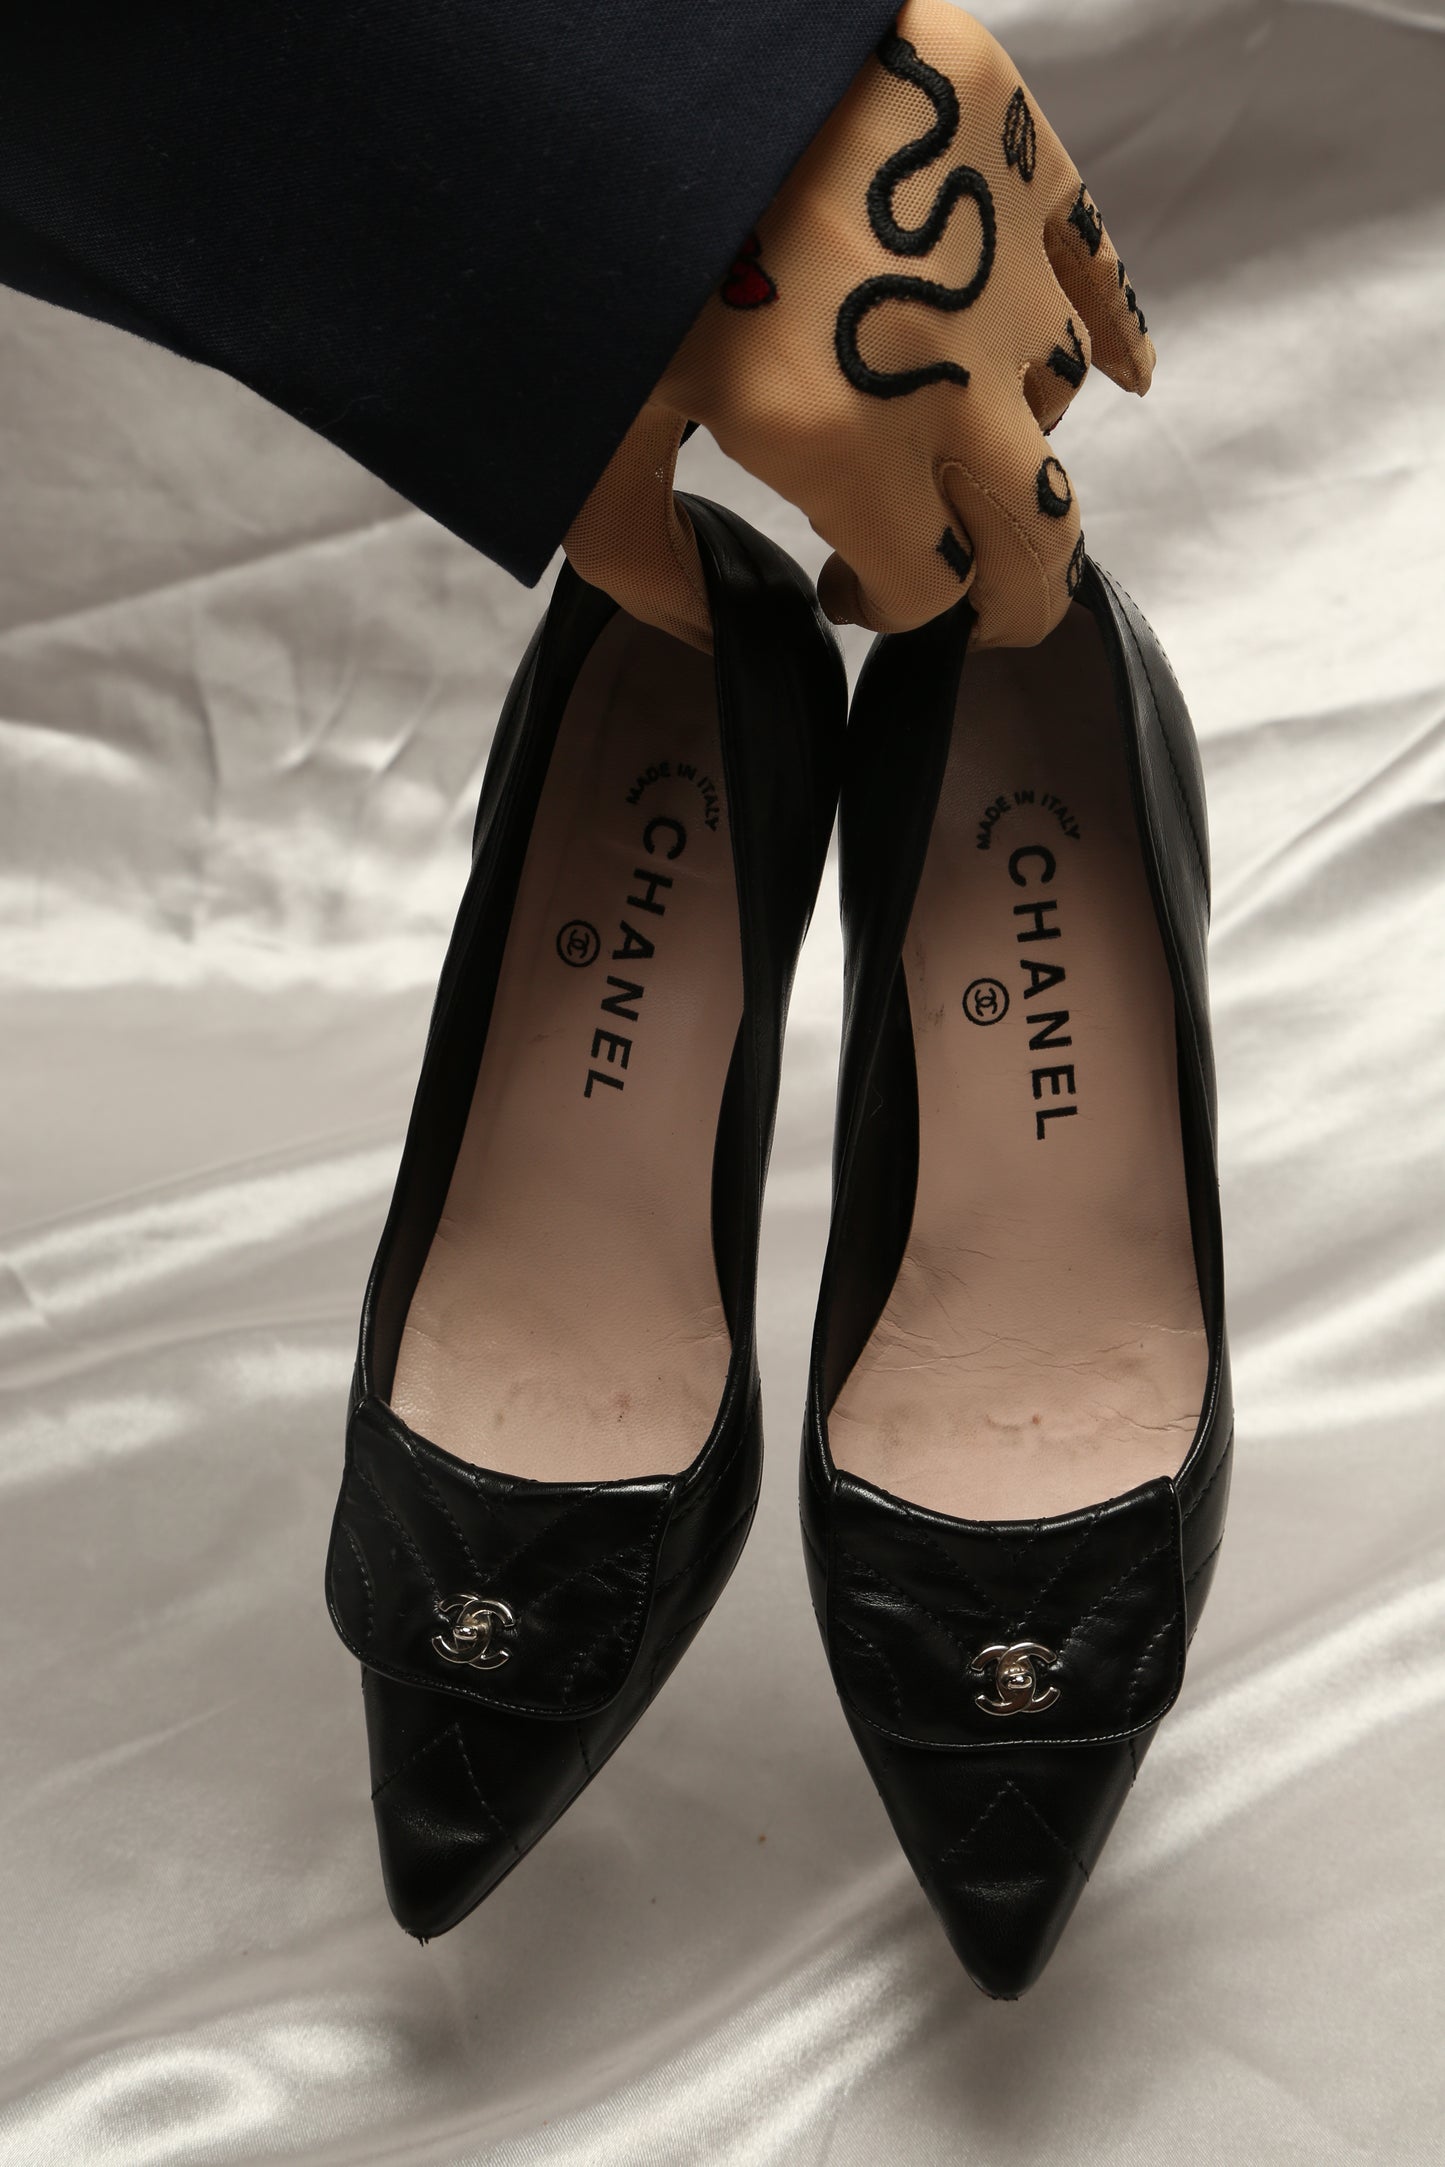 Extremely Rare CHANEL Heels